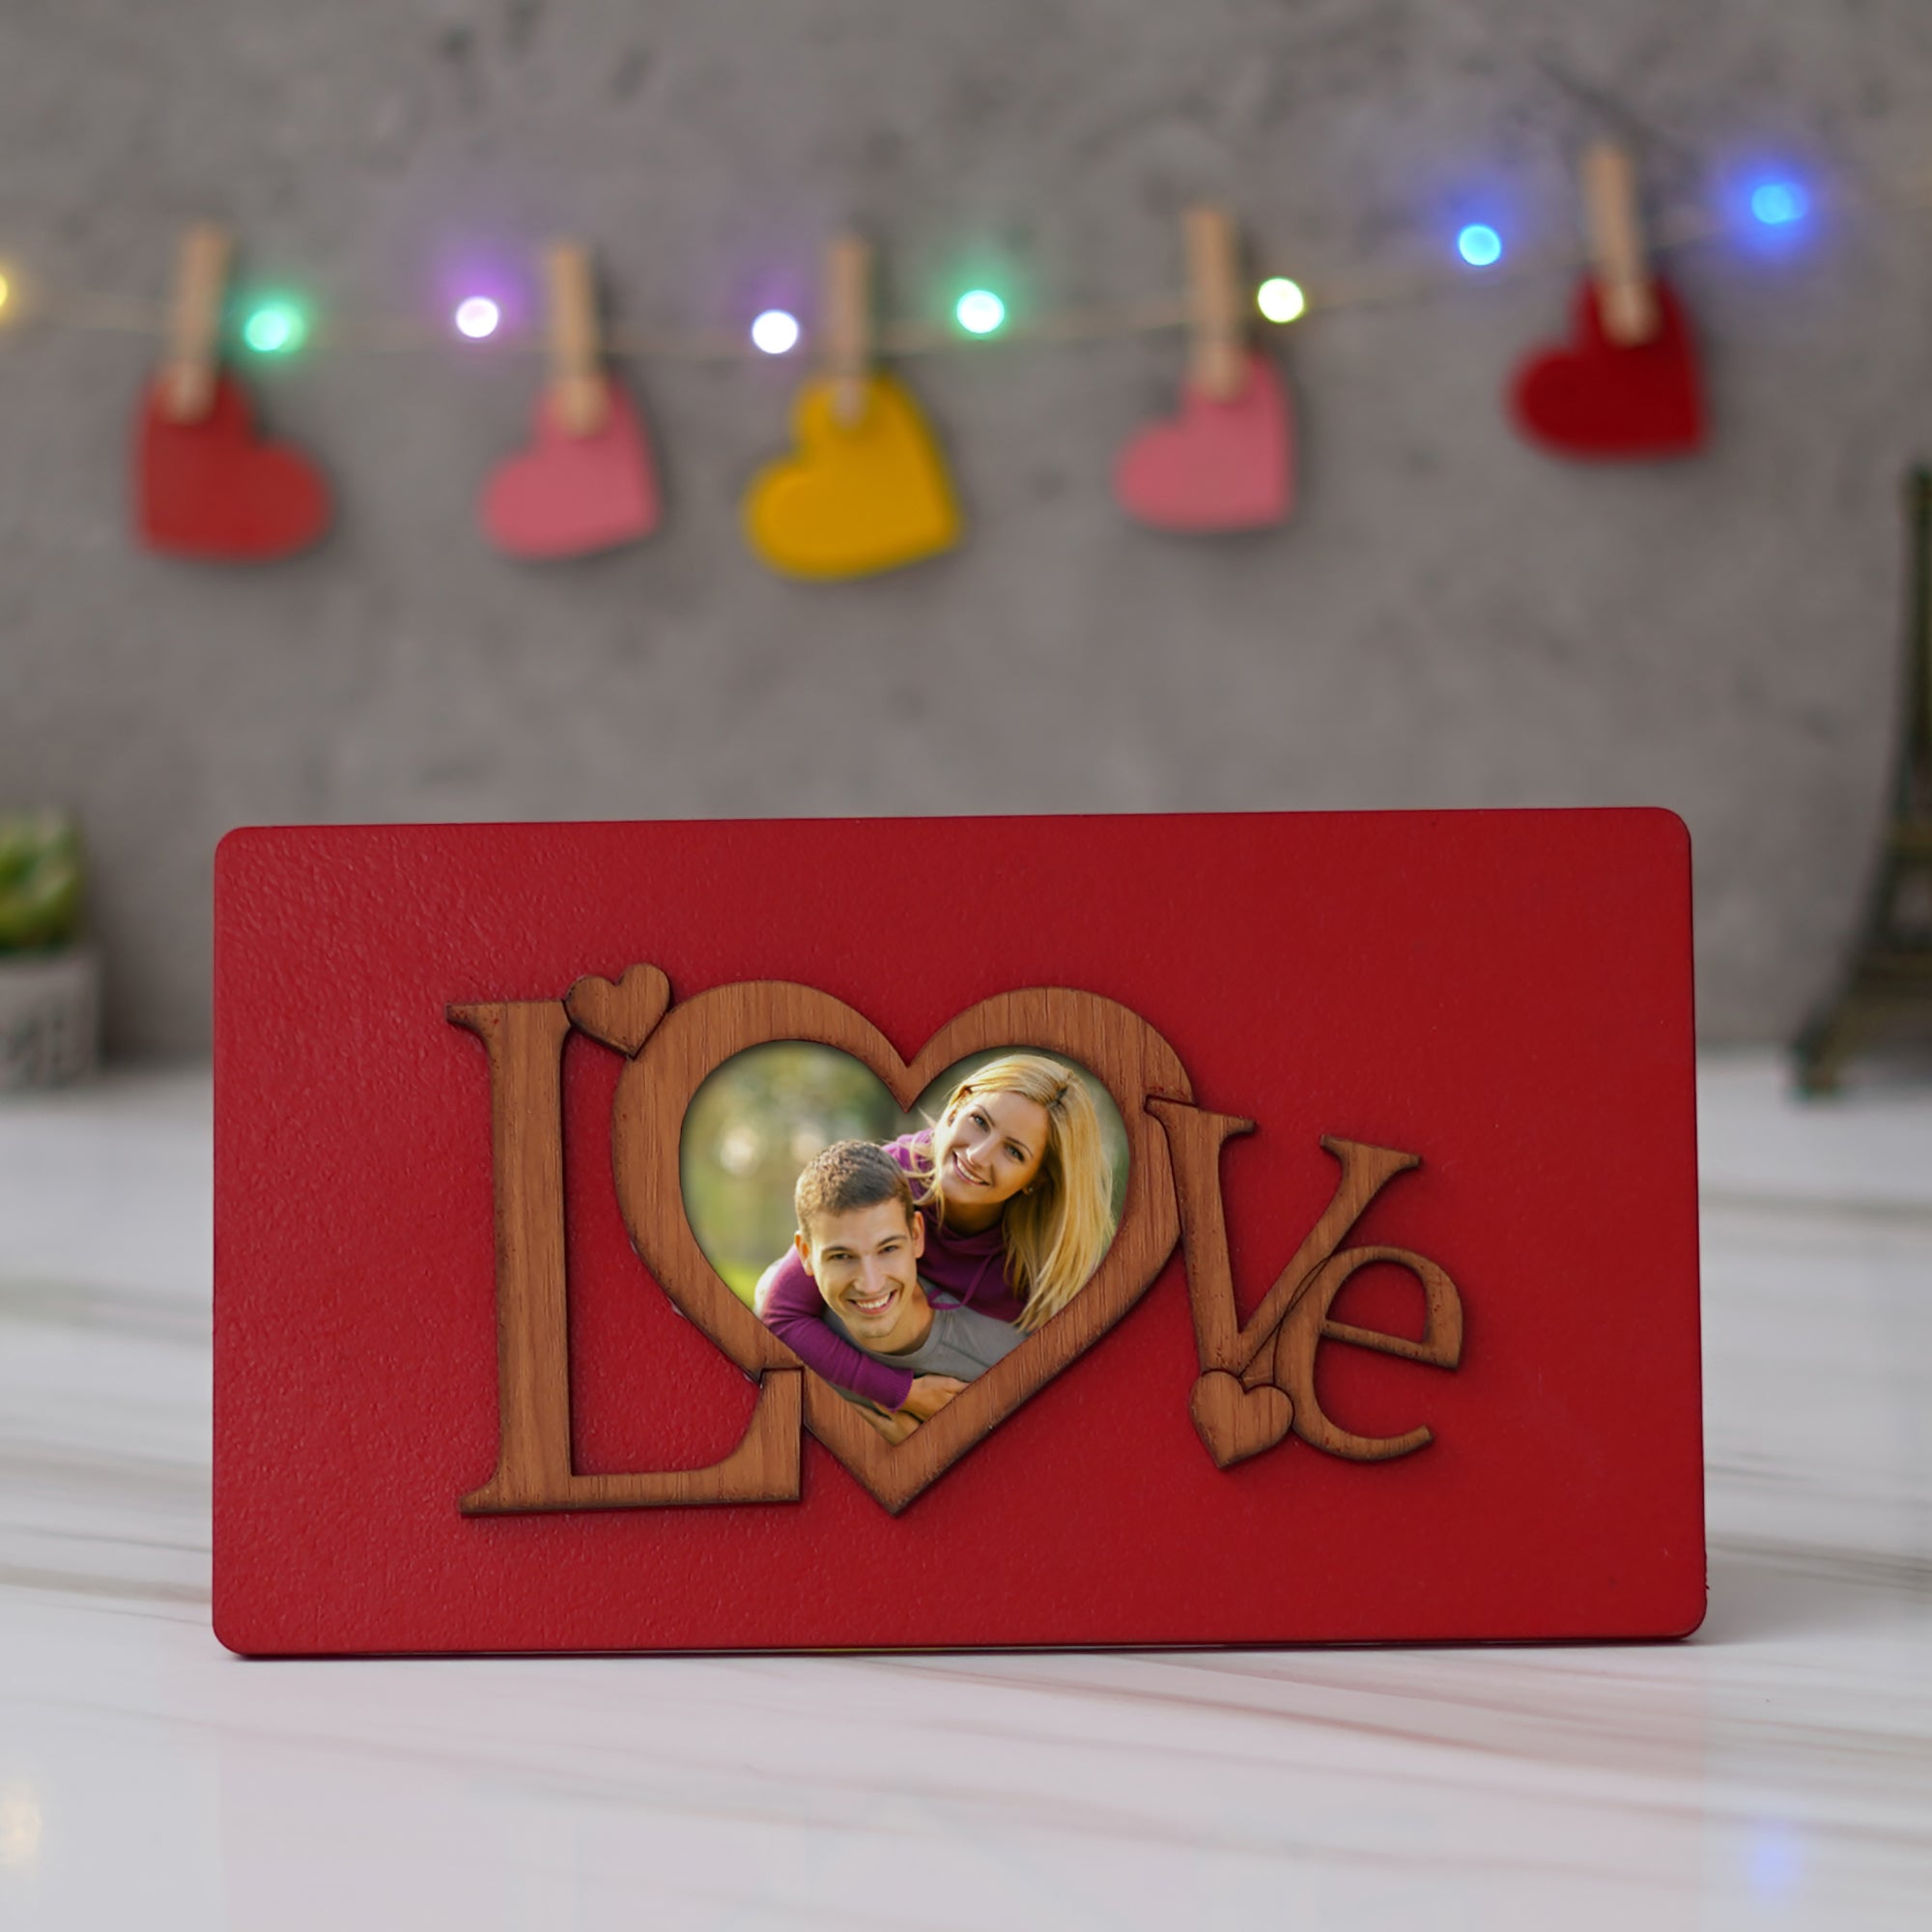 Valentine Combo of Golden Red Rose Gift Set, "Love" Wooden Photo Frame With Red Stand, Bride Kissing Groom Romantic Polyresin Decorative Showpiece 3